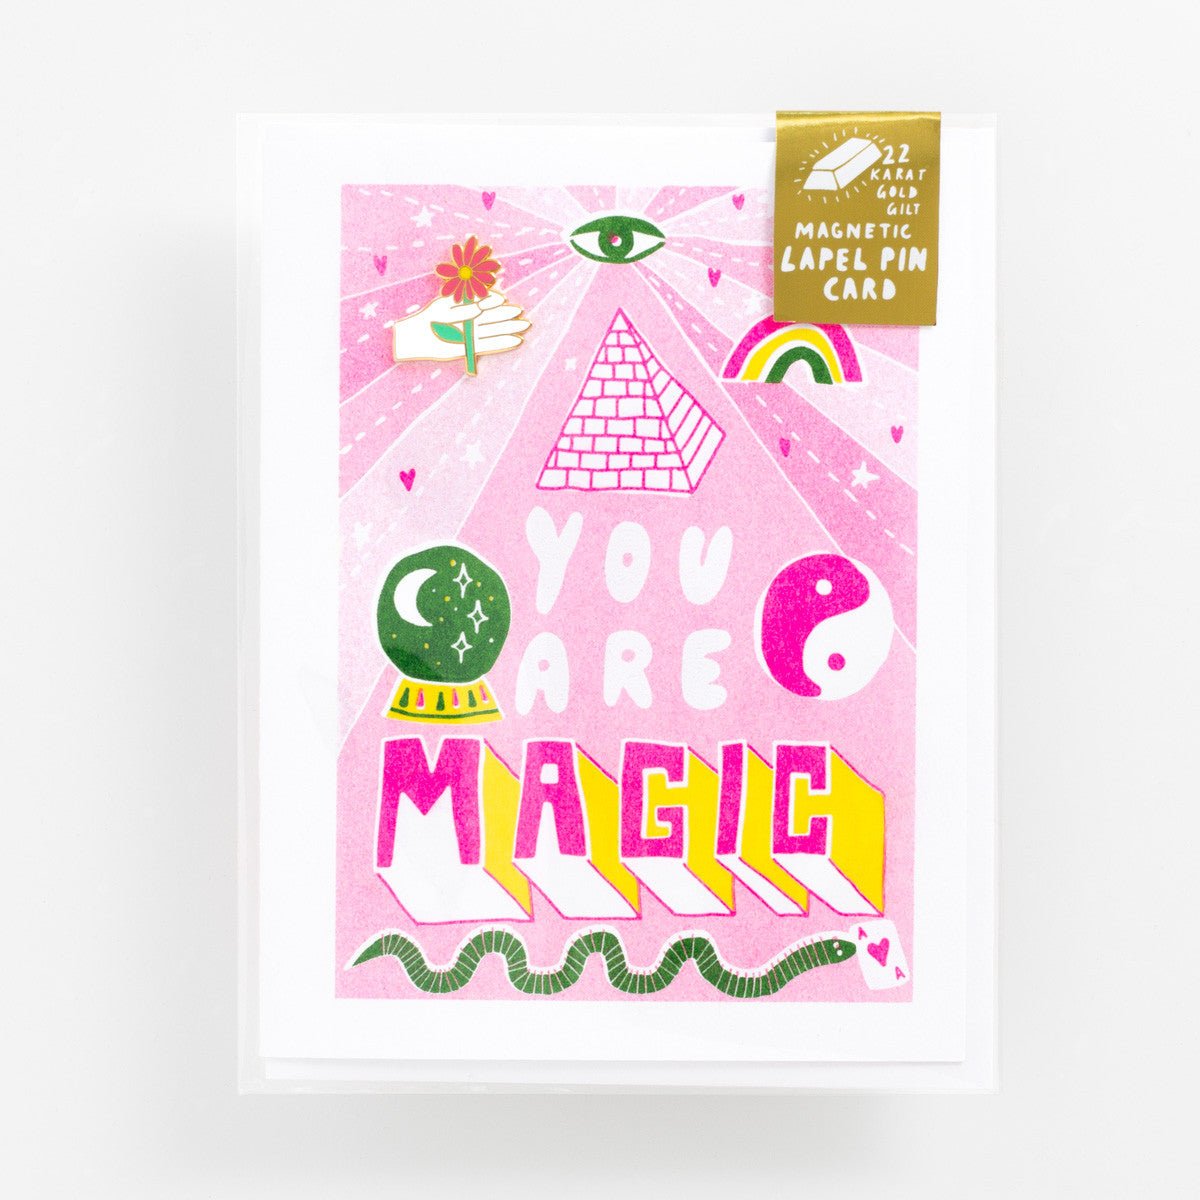 You Are Magic - Lapel Pin Card - Yellow Owl Workshop